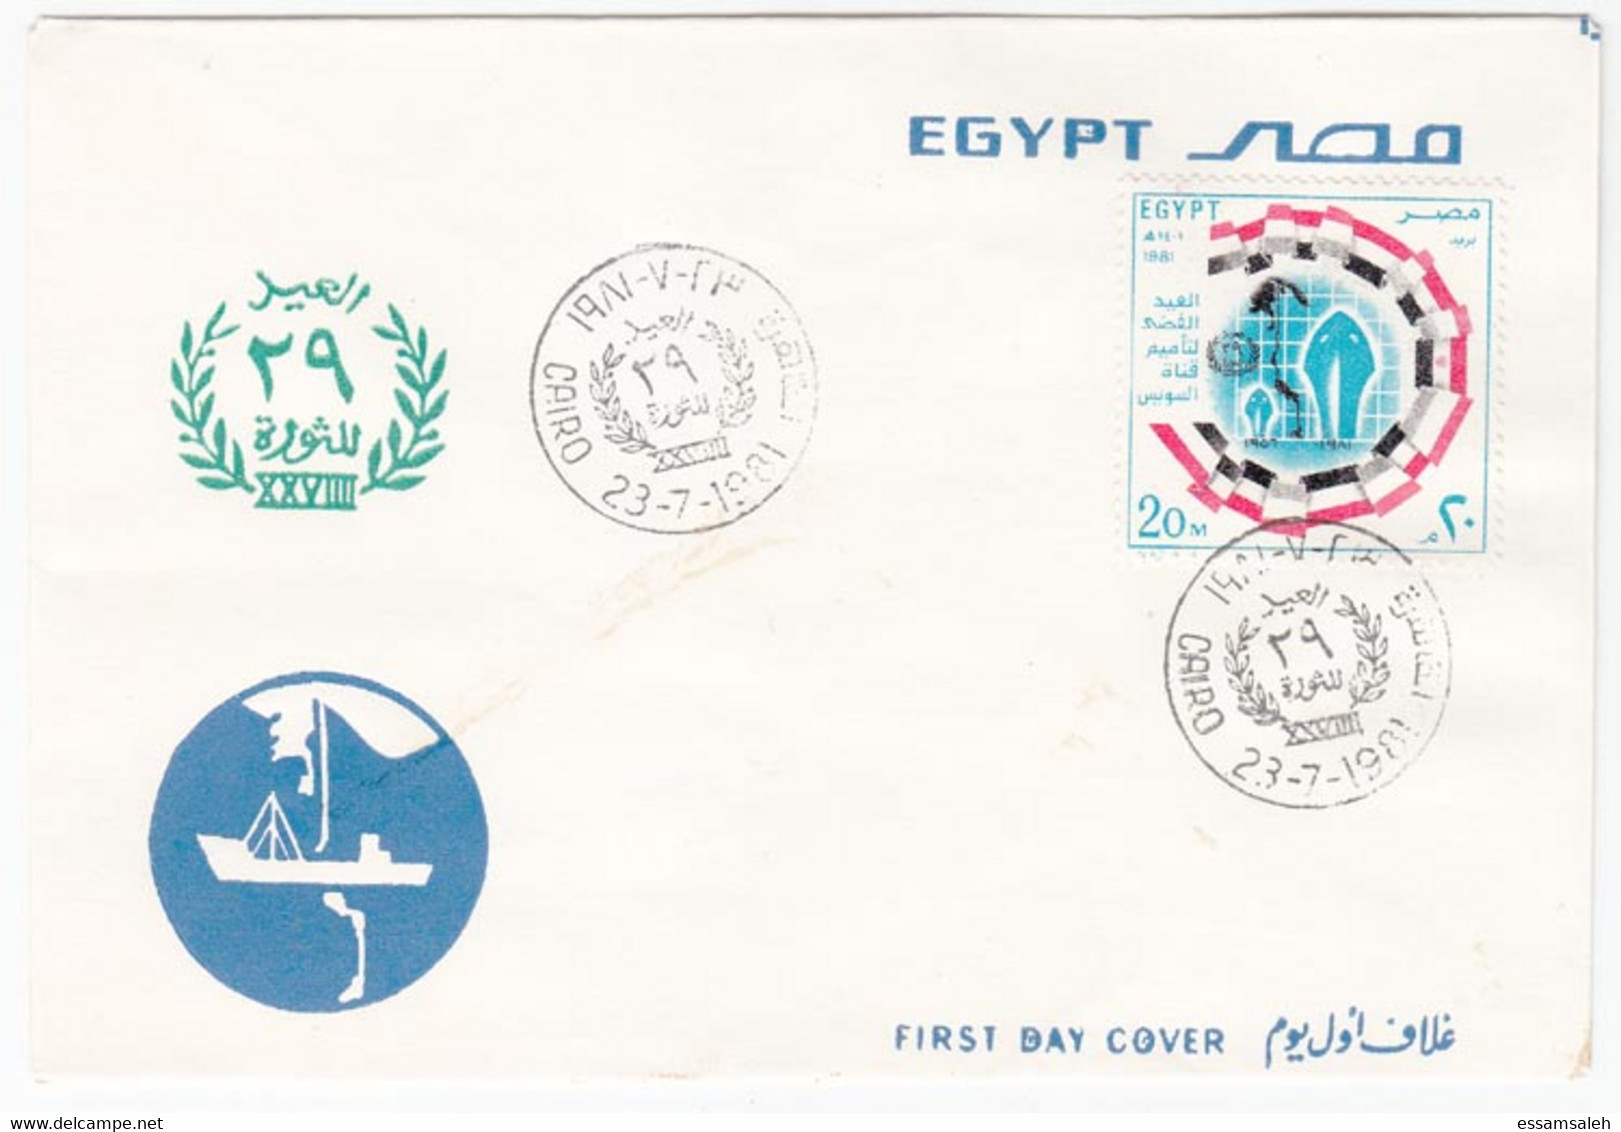 EGS30537 Egypt 1981 Illustrated FDC 29th Anniversary Of Revolution Of 1952 - Covers & Documents